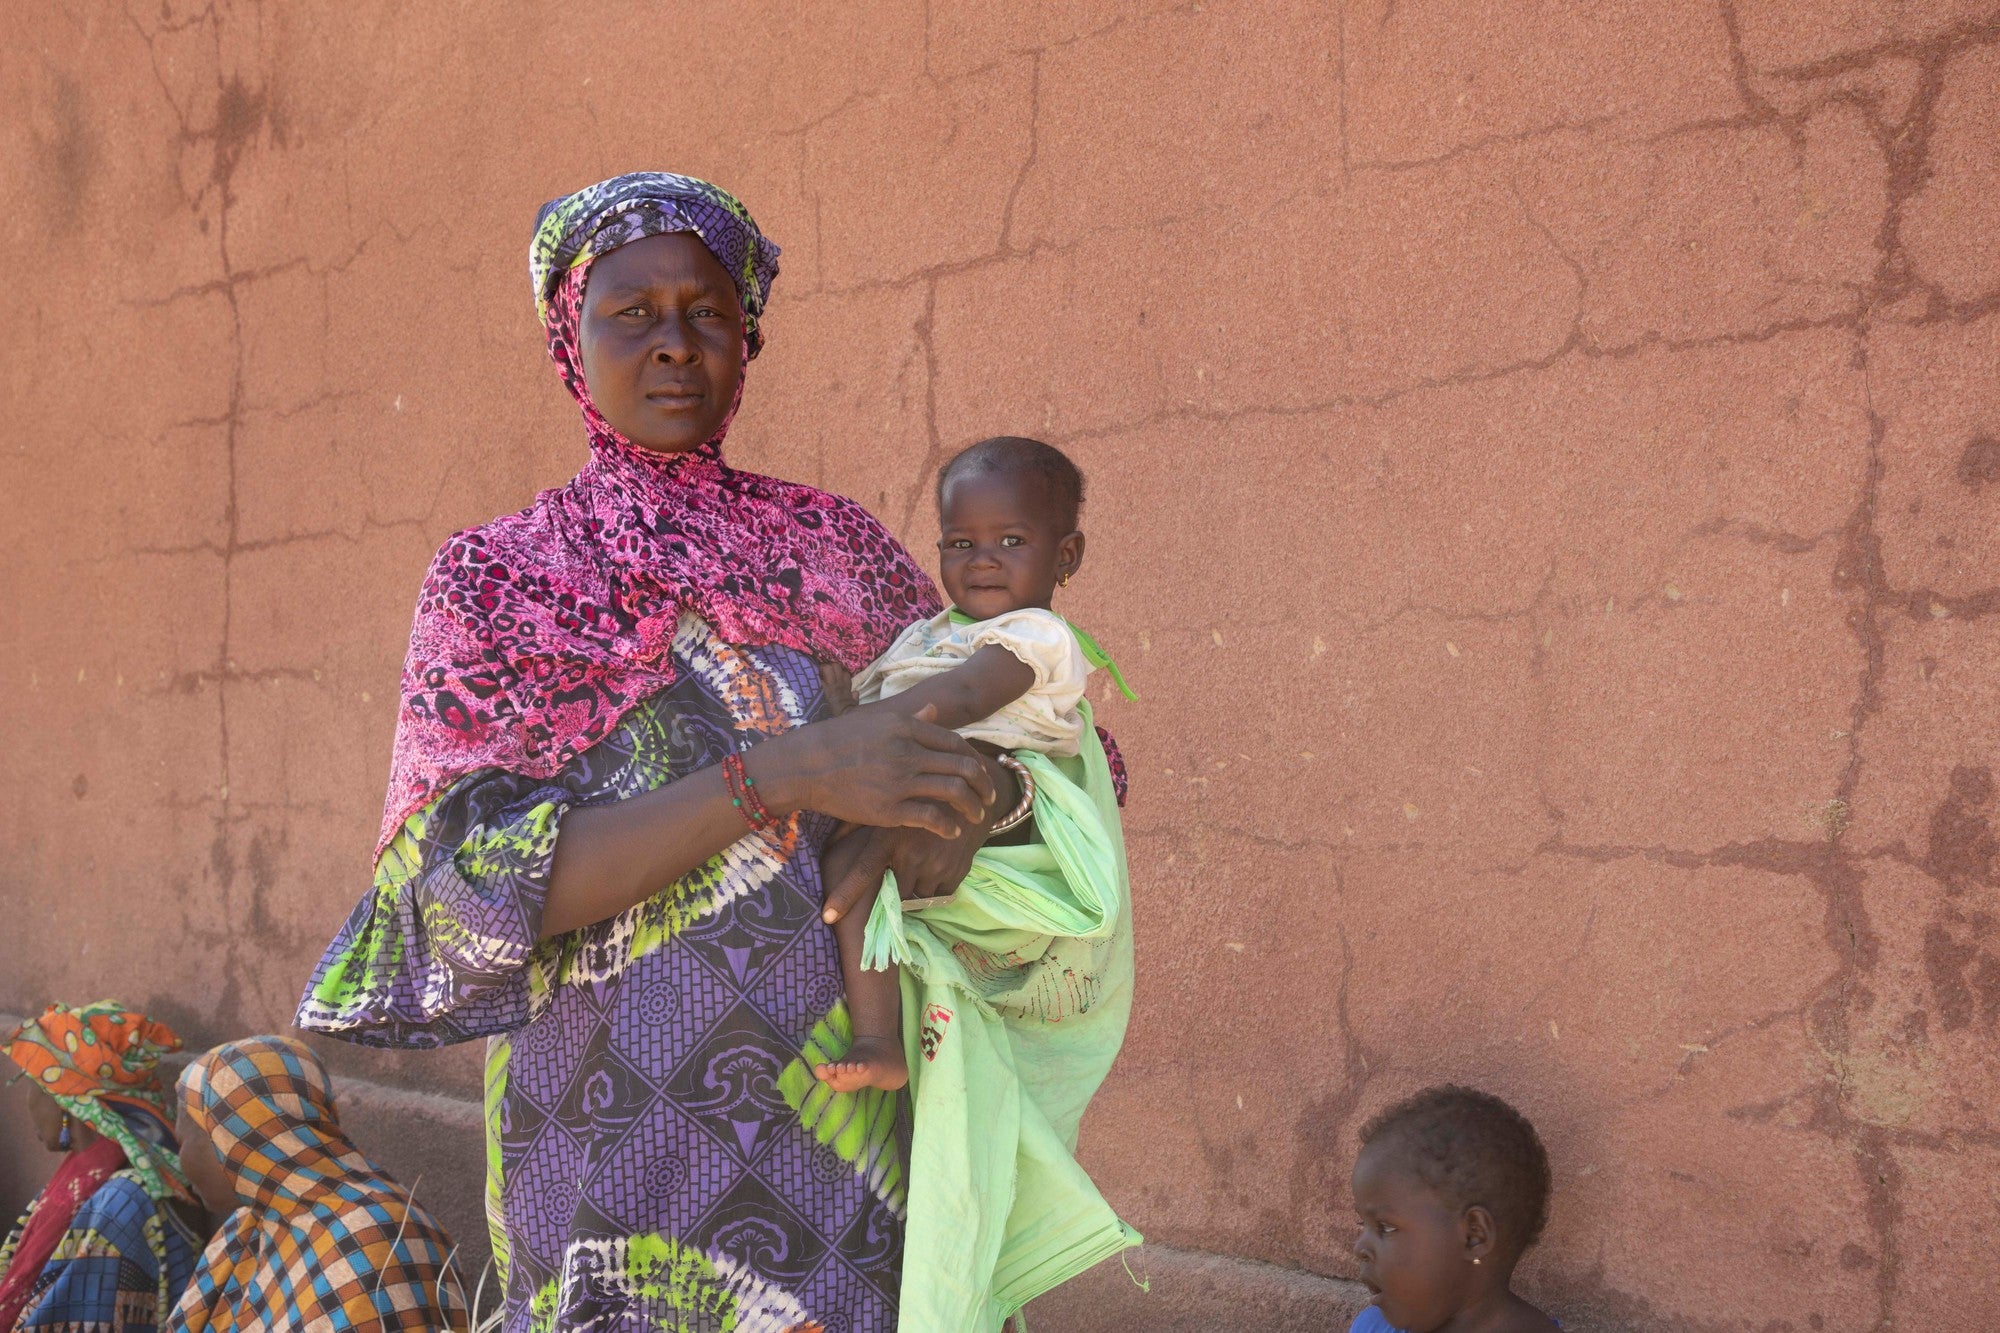 A mother and child stand in a camp for internally displaced persons in Mali.